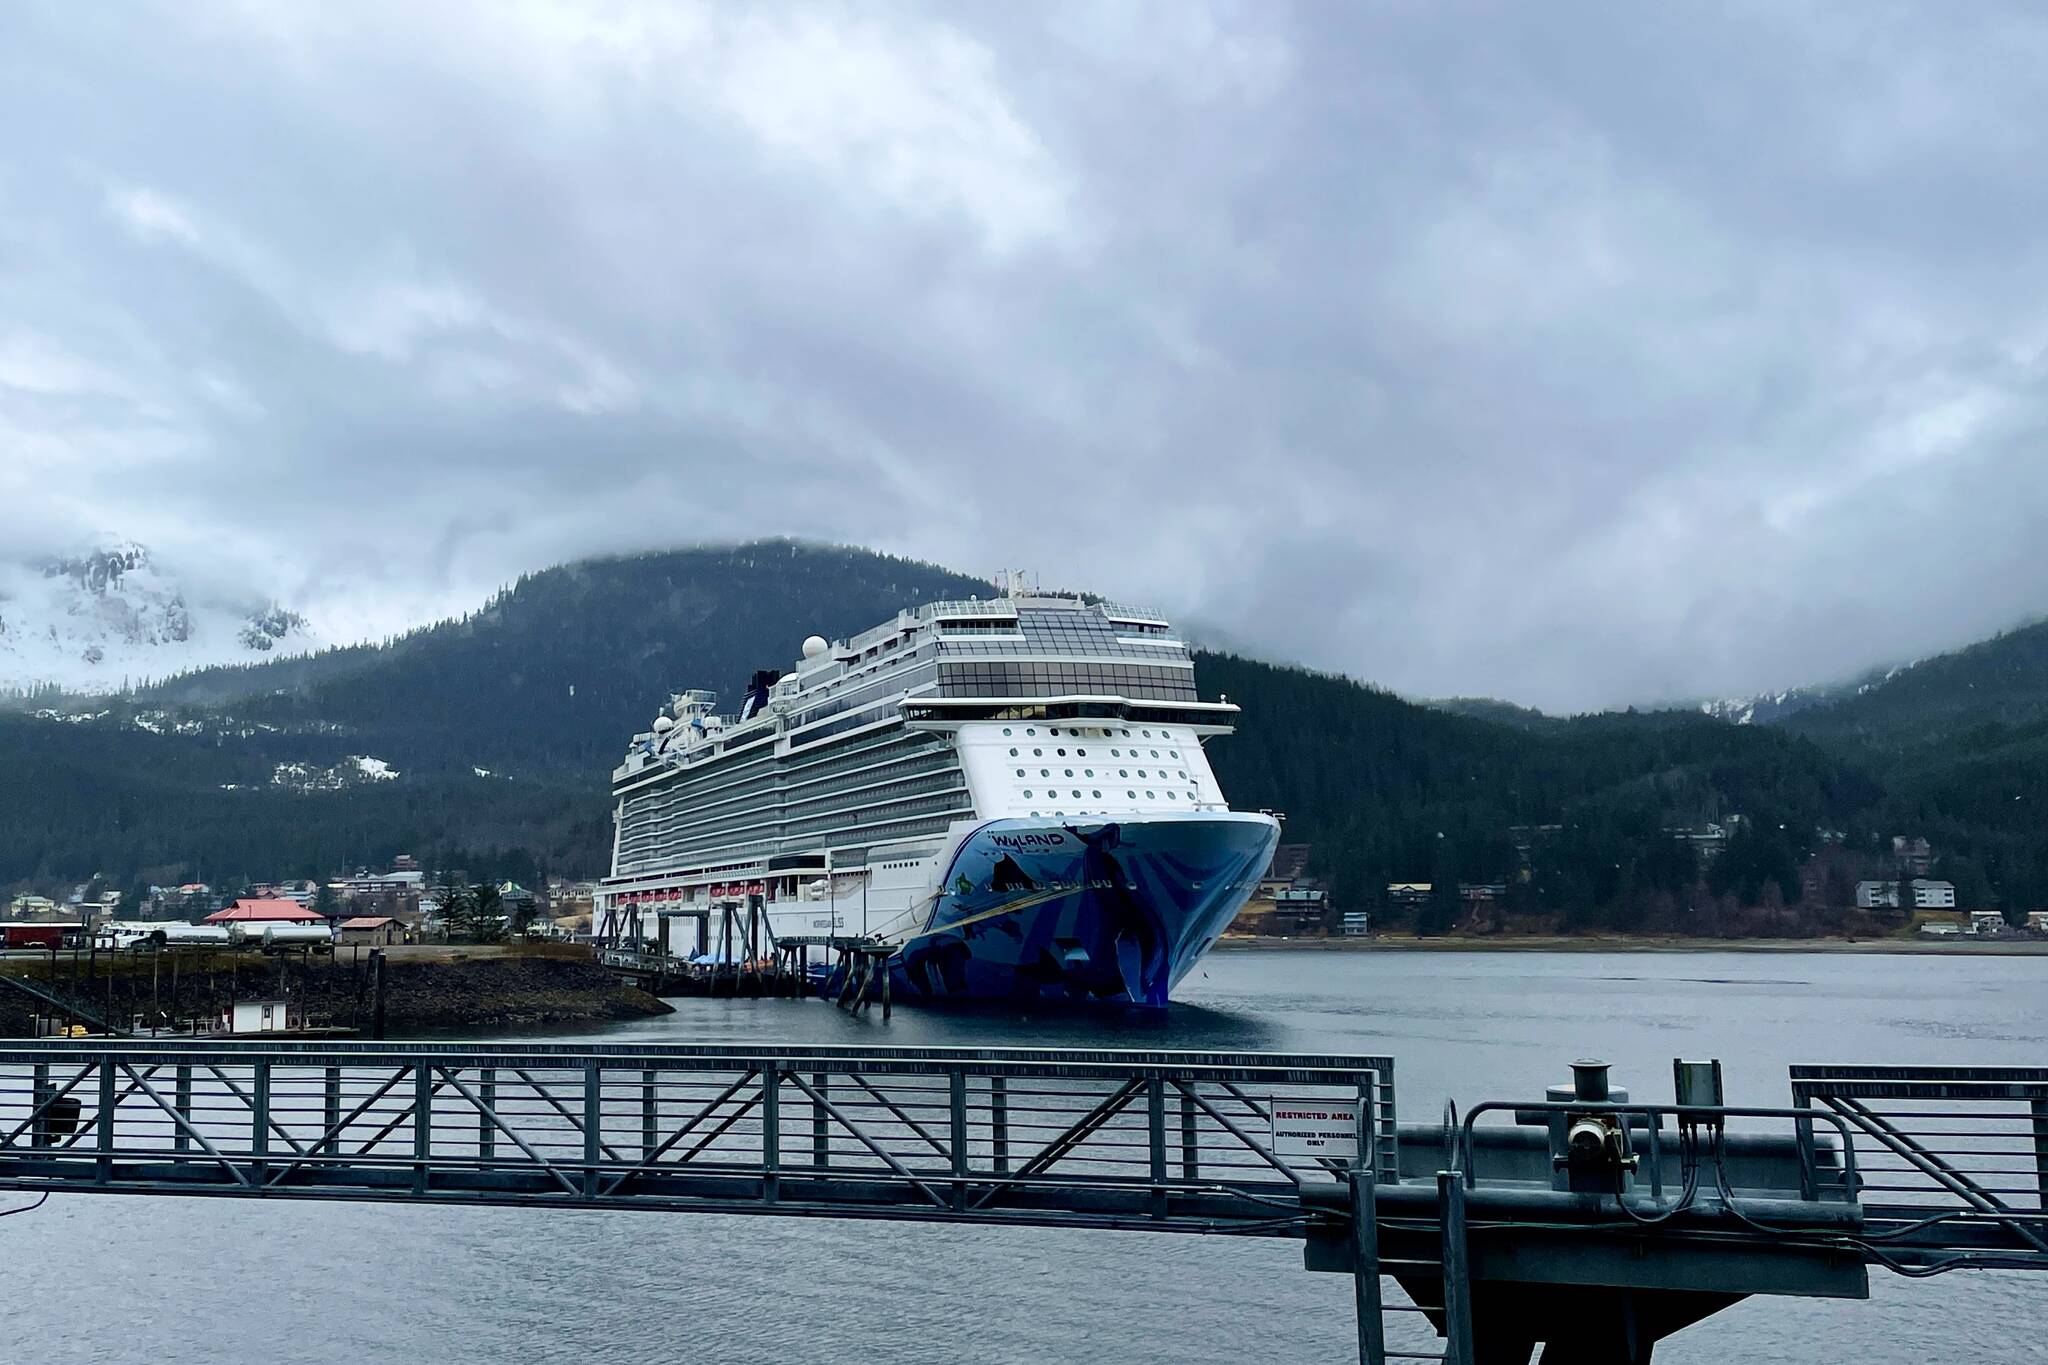 The Norwegian Bliss arrives in Juneau on April 25, 2022, the first cruise of the 2022 season. (Michael S. Lockett / Juneau Empire)